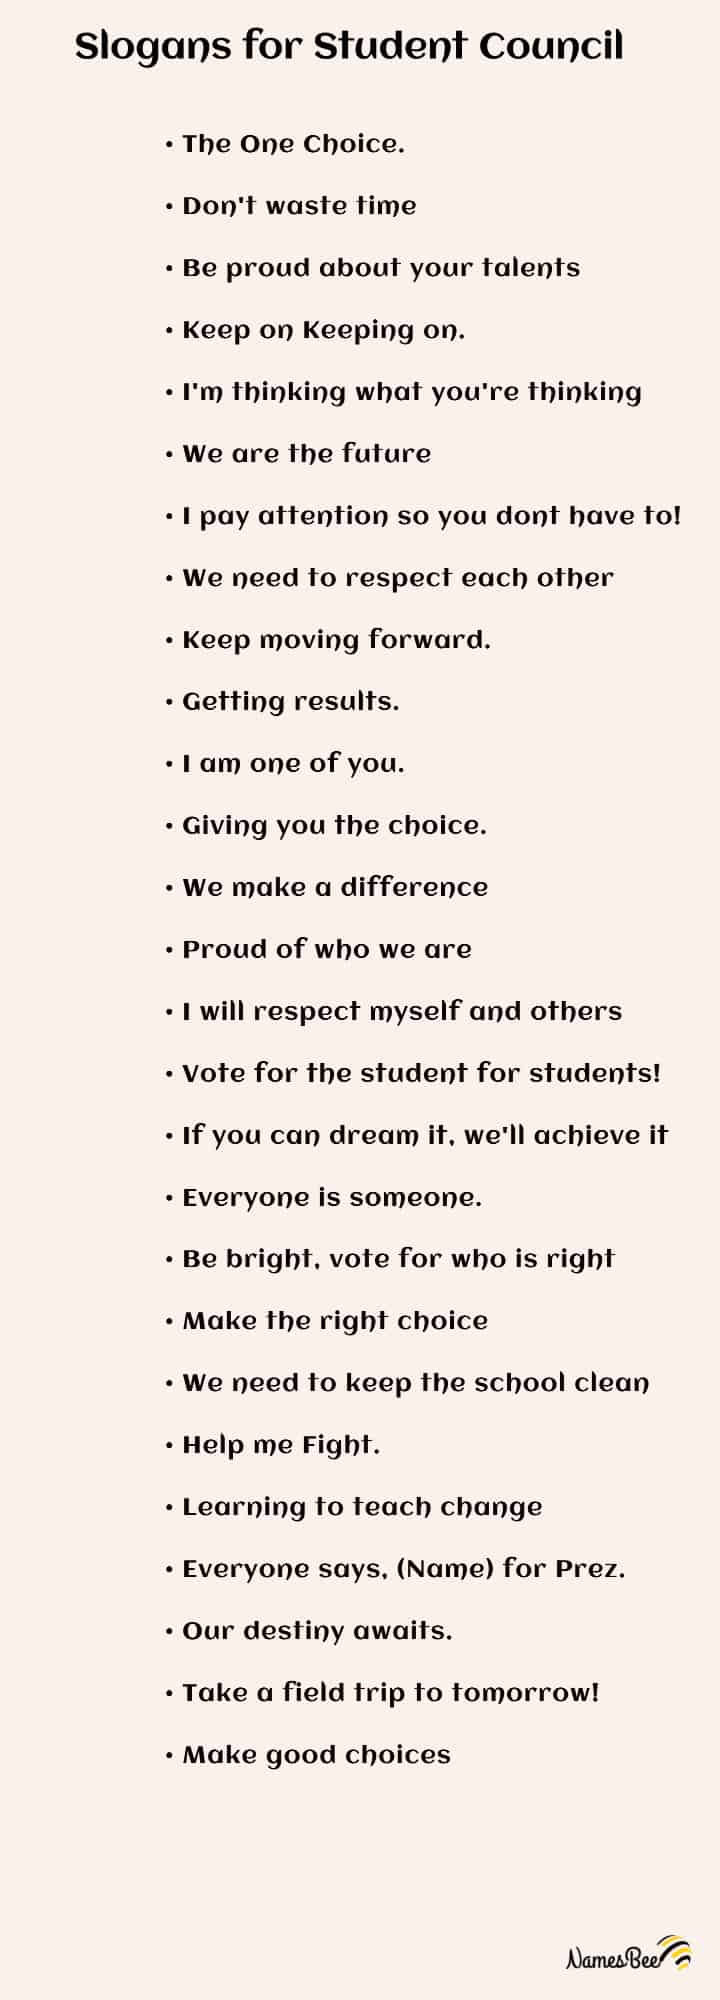 100+ Cool Slogans for Student Council – NamesBee